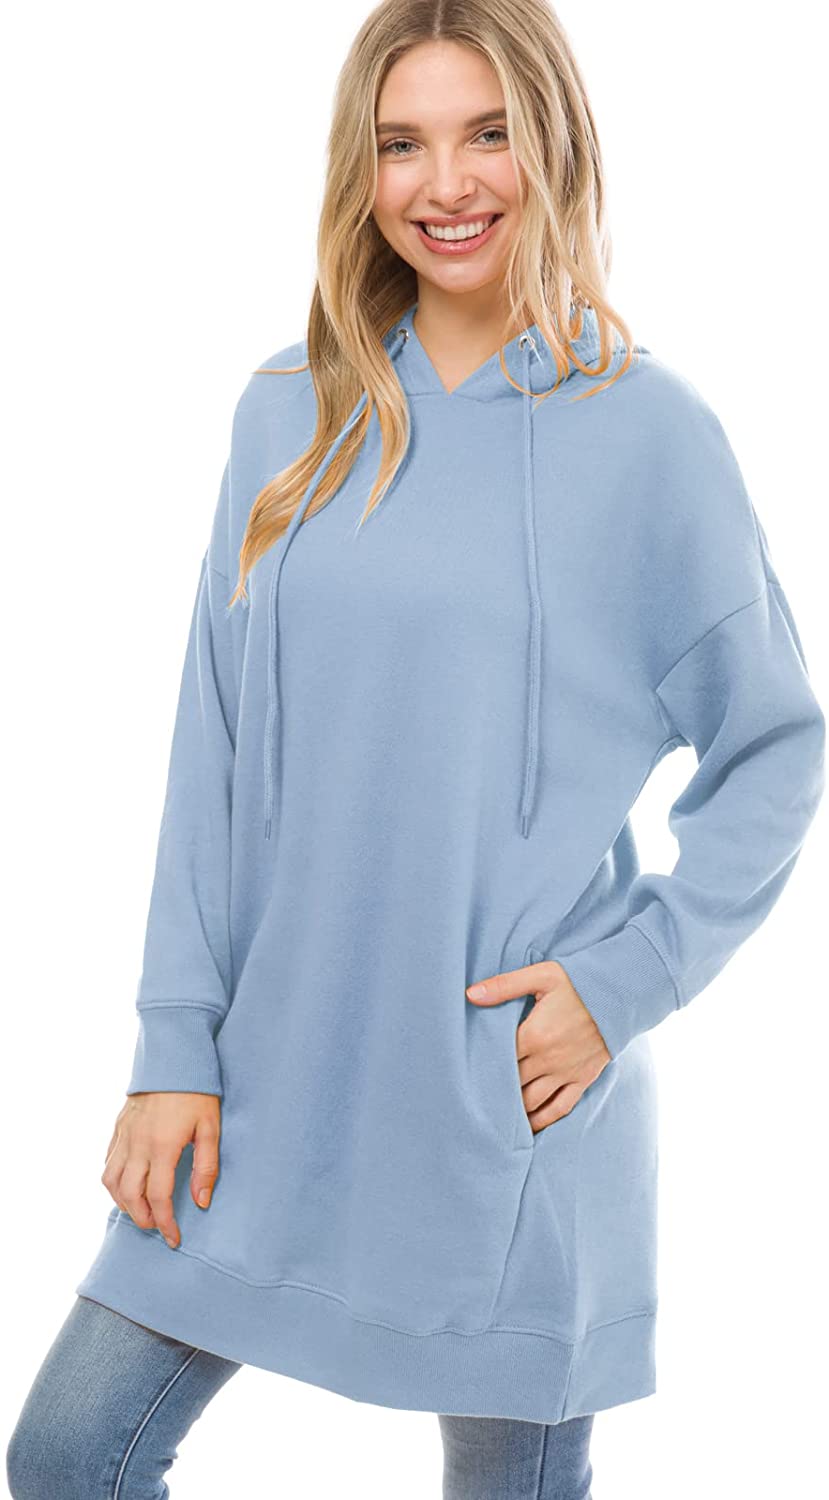 MixMatchy Women's Casual Oversized Loose Fit Long Sleeve Zip Up